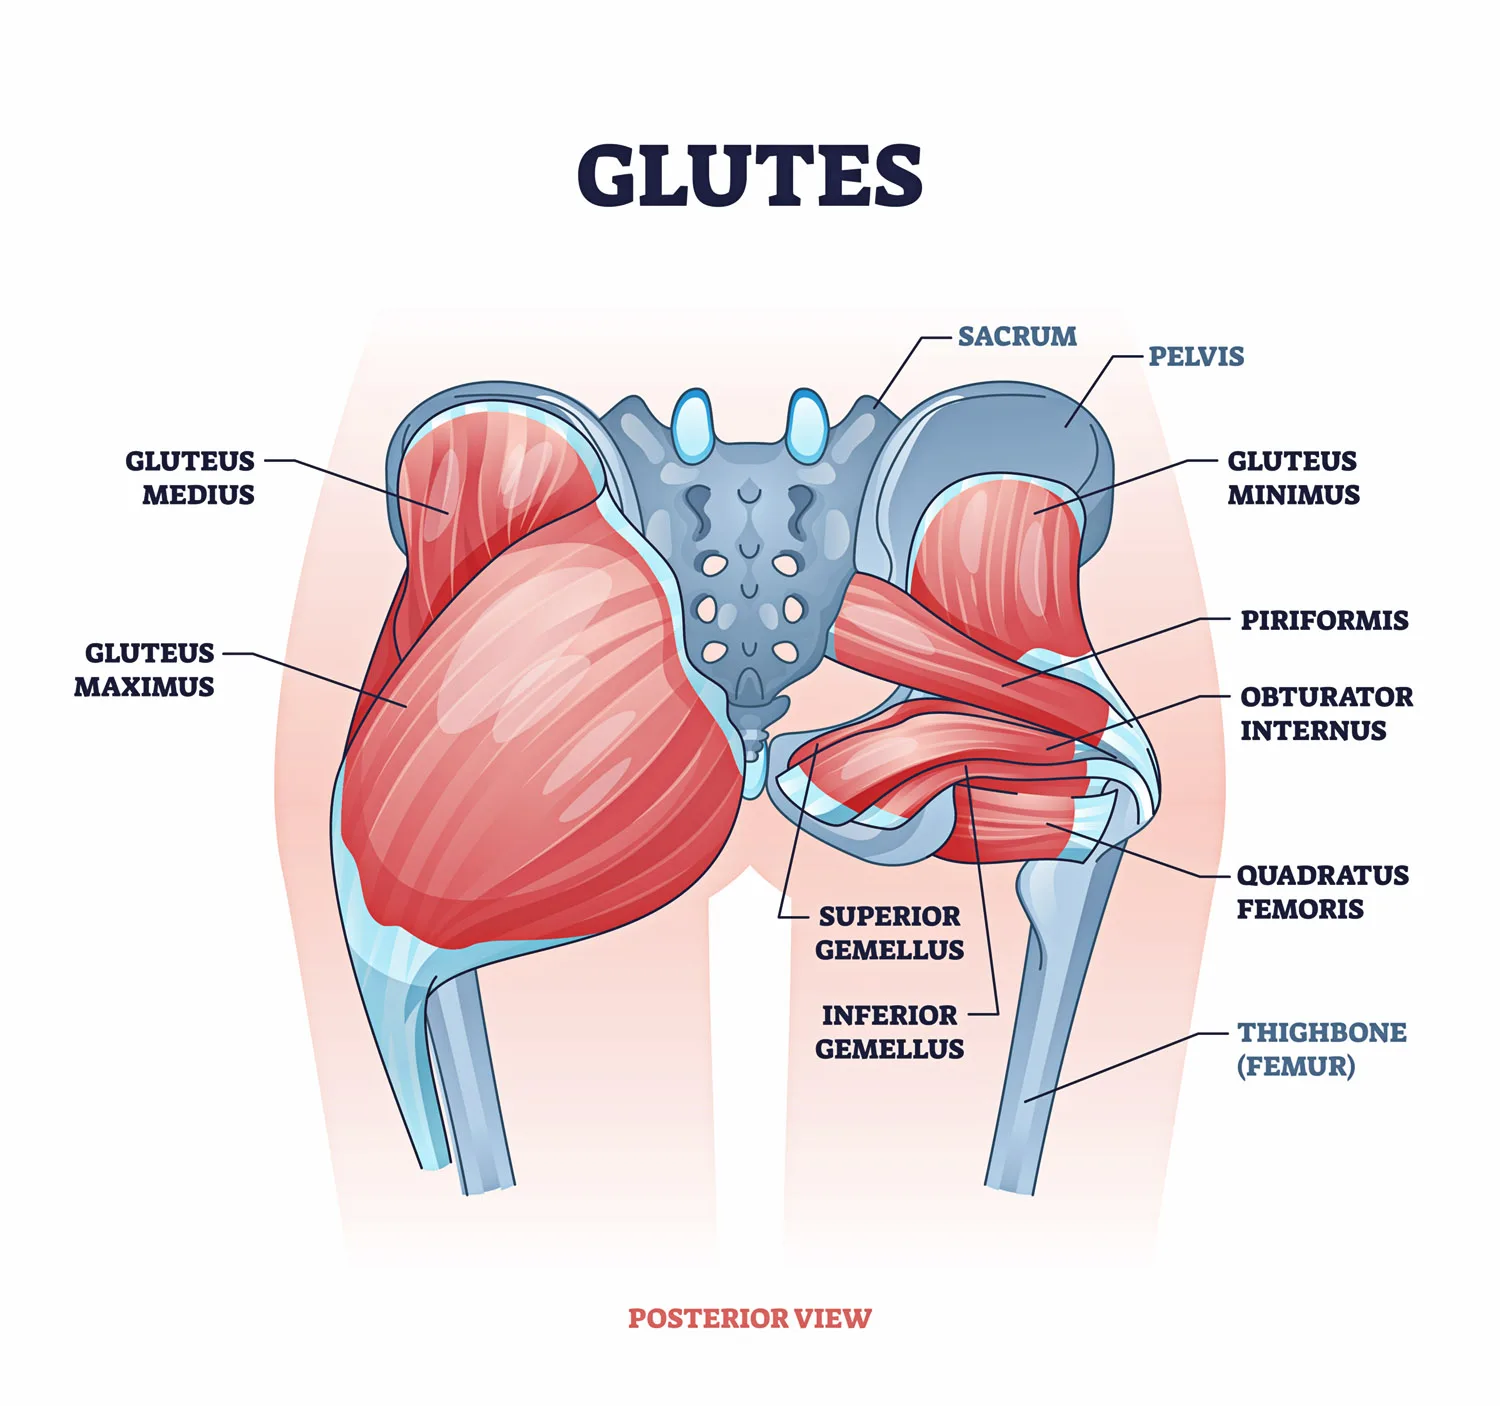 Glutes as gluteal body muscles for human buttocks strength outline concept. Labeled educational anatomical scheme with physical skeletal and gluteus medius, maximus and minimus vector illustration.